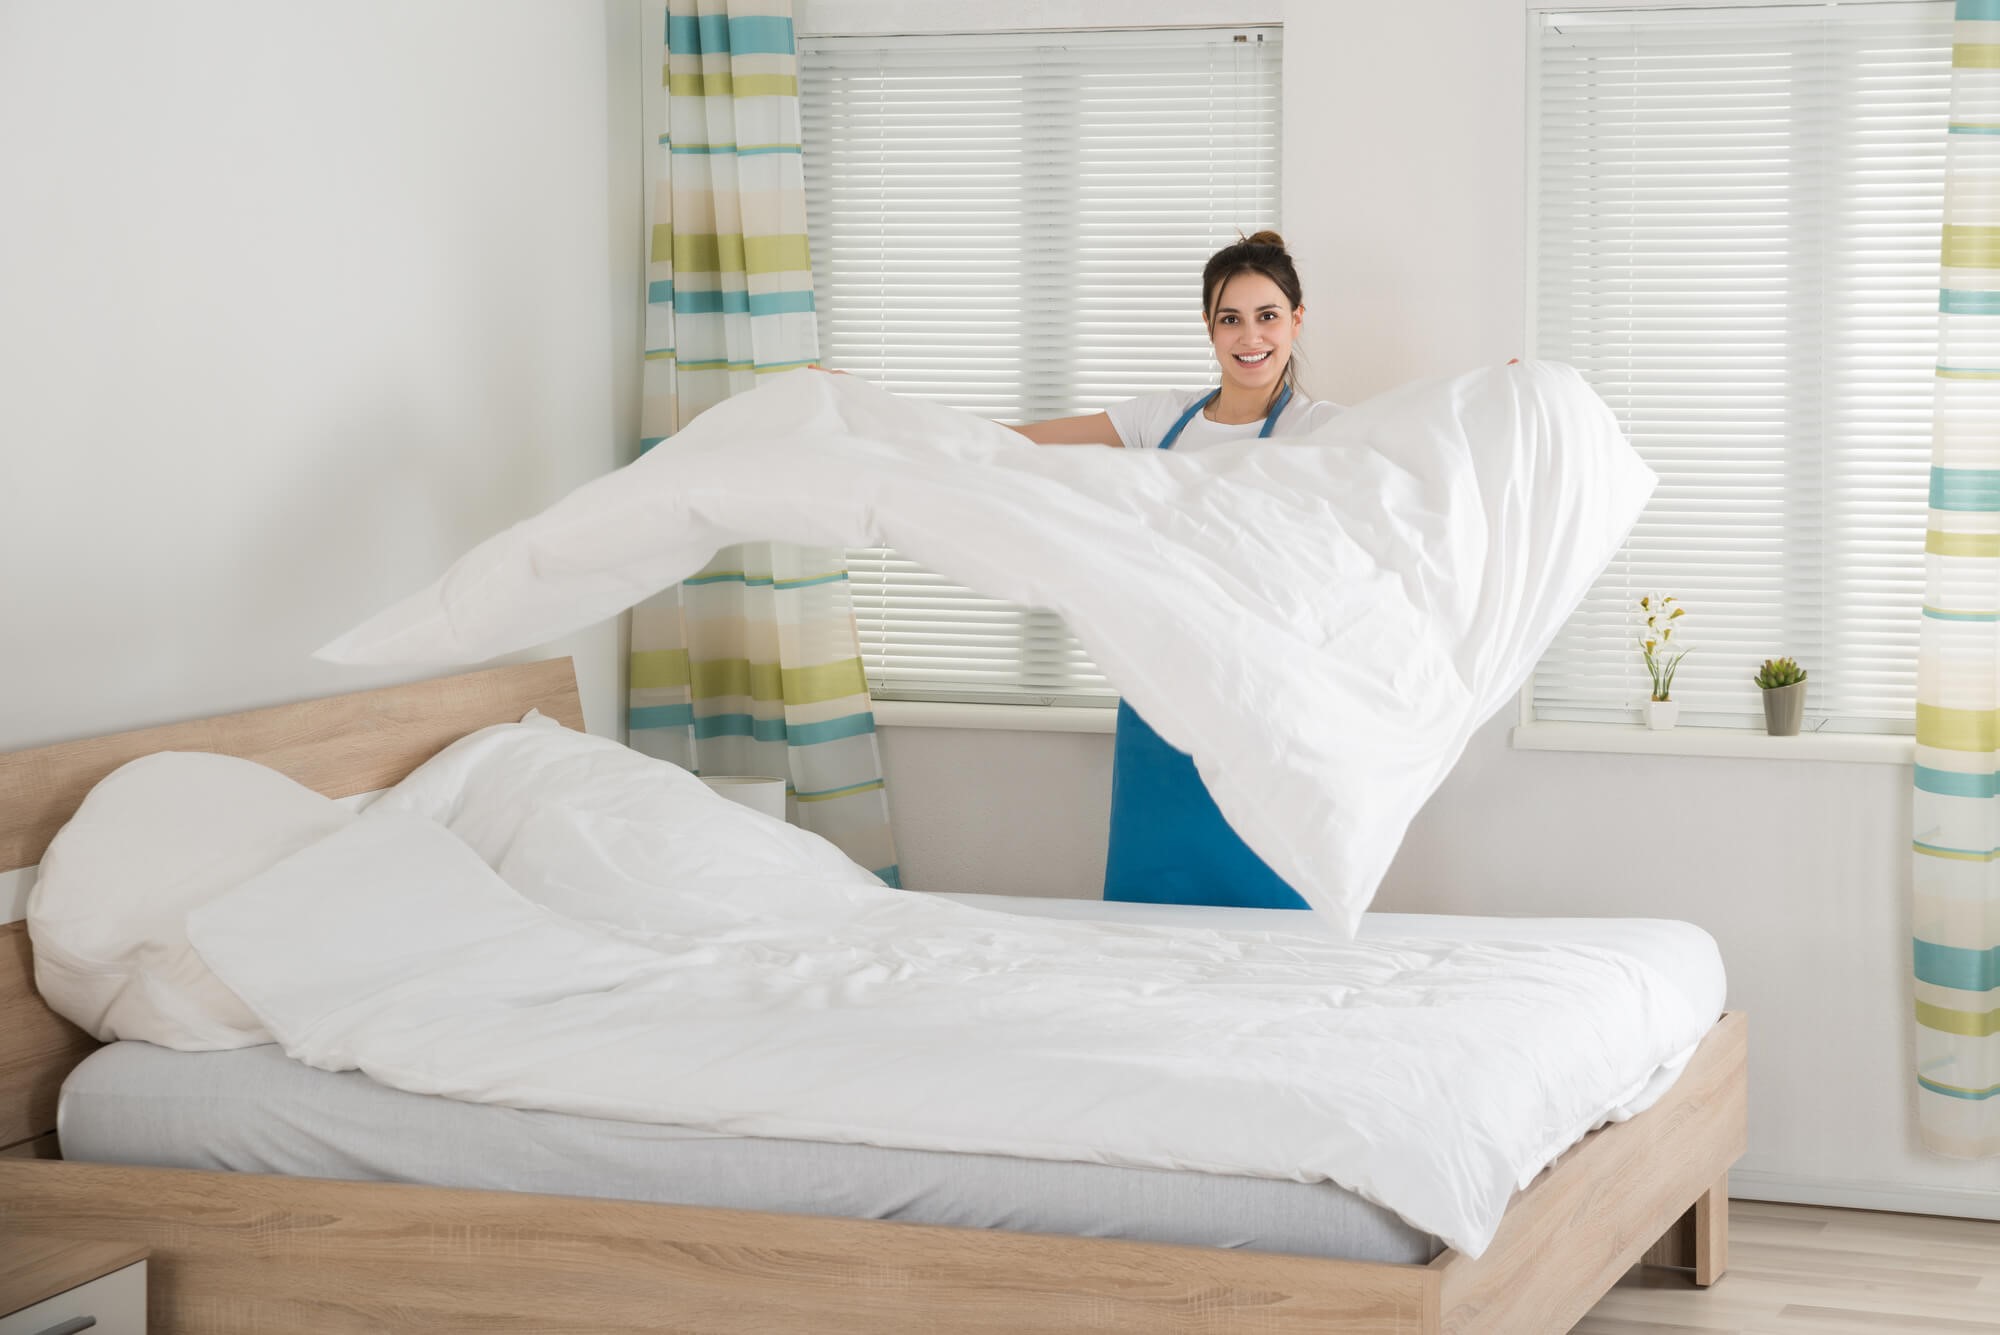 How To Get Odors Out Of A Mattress